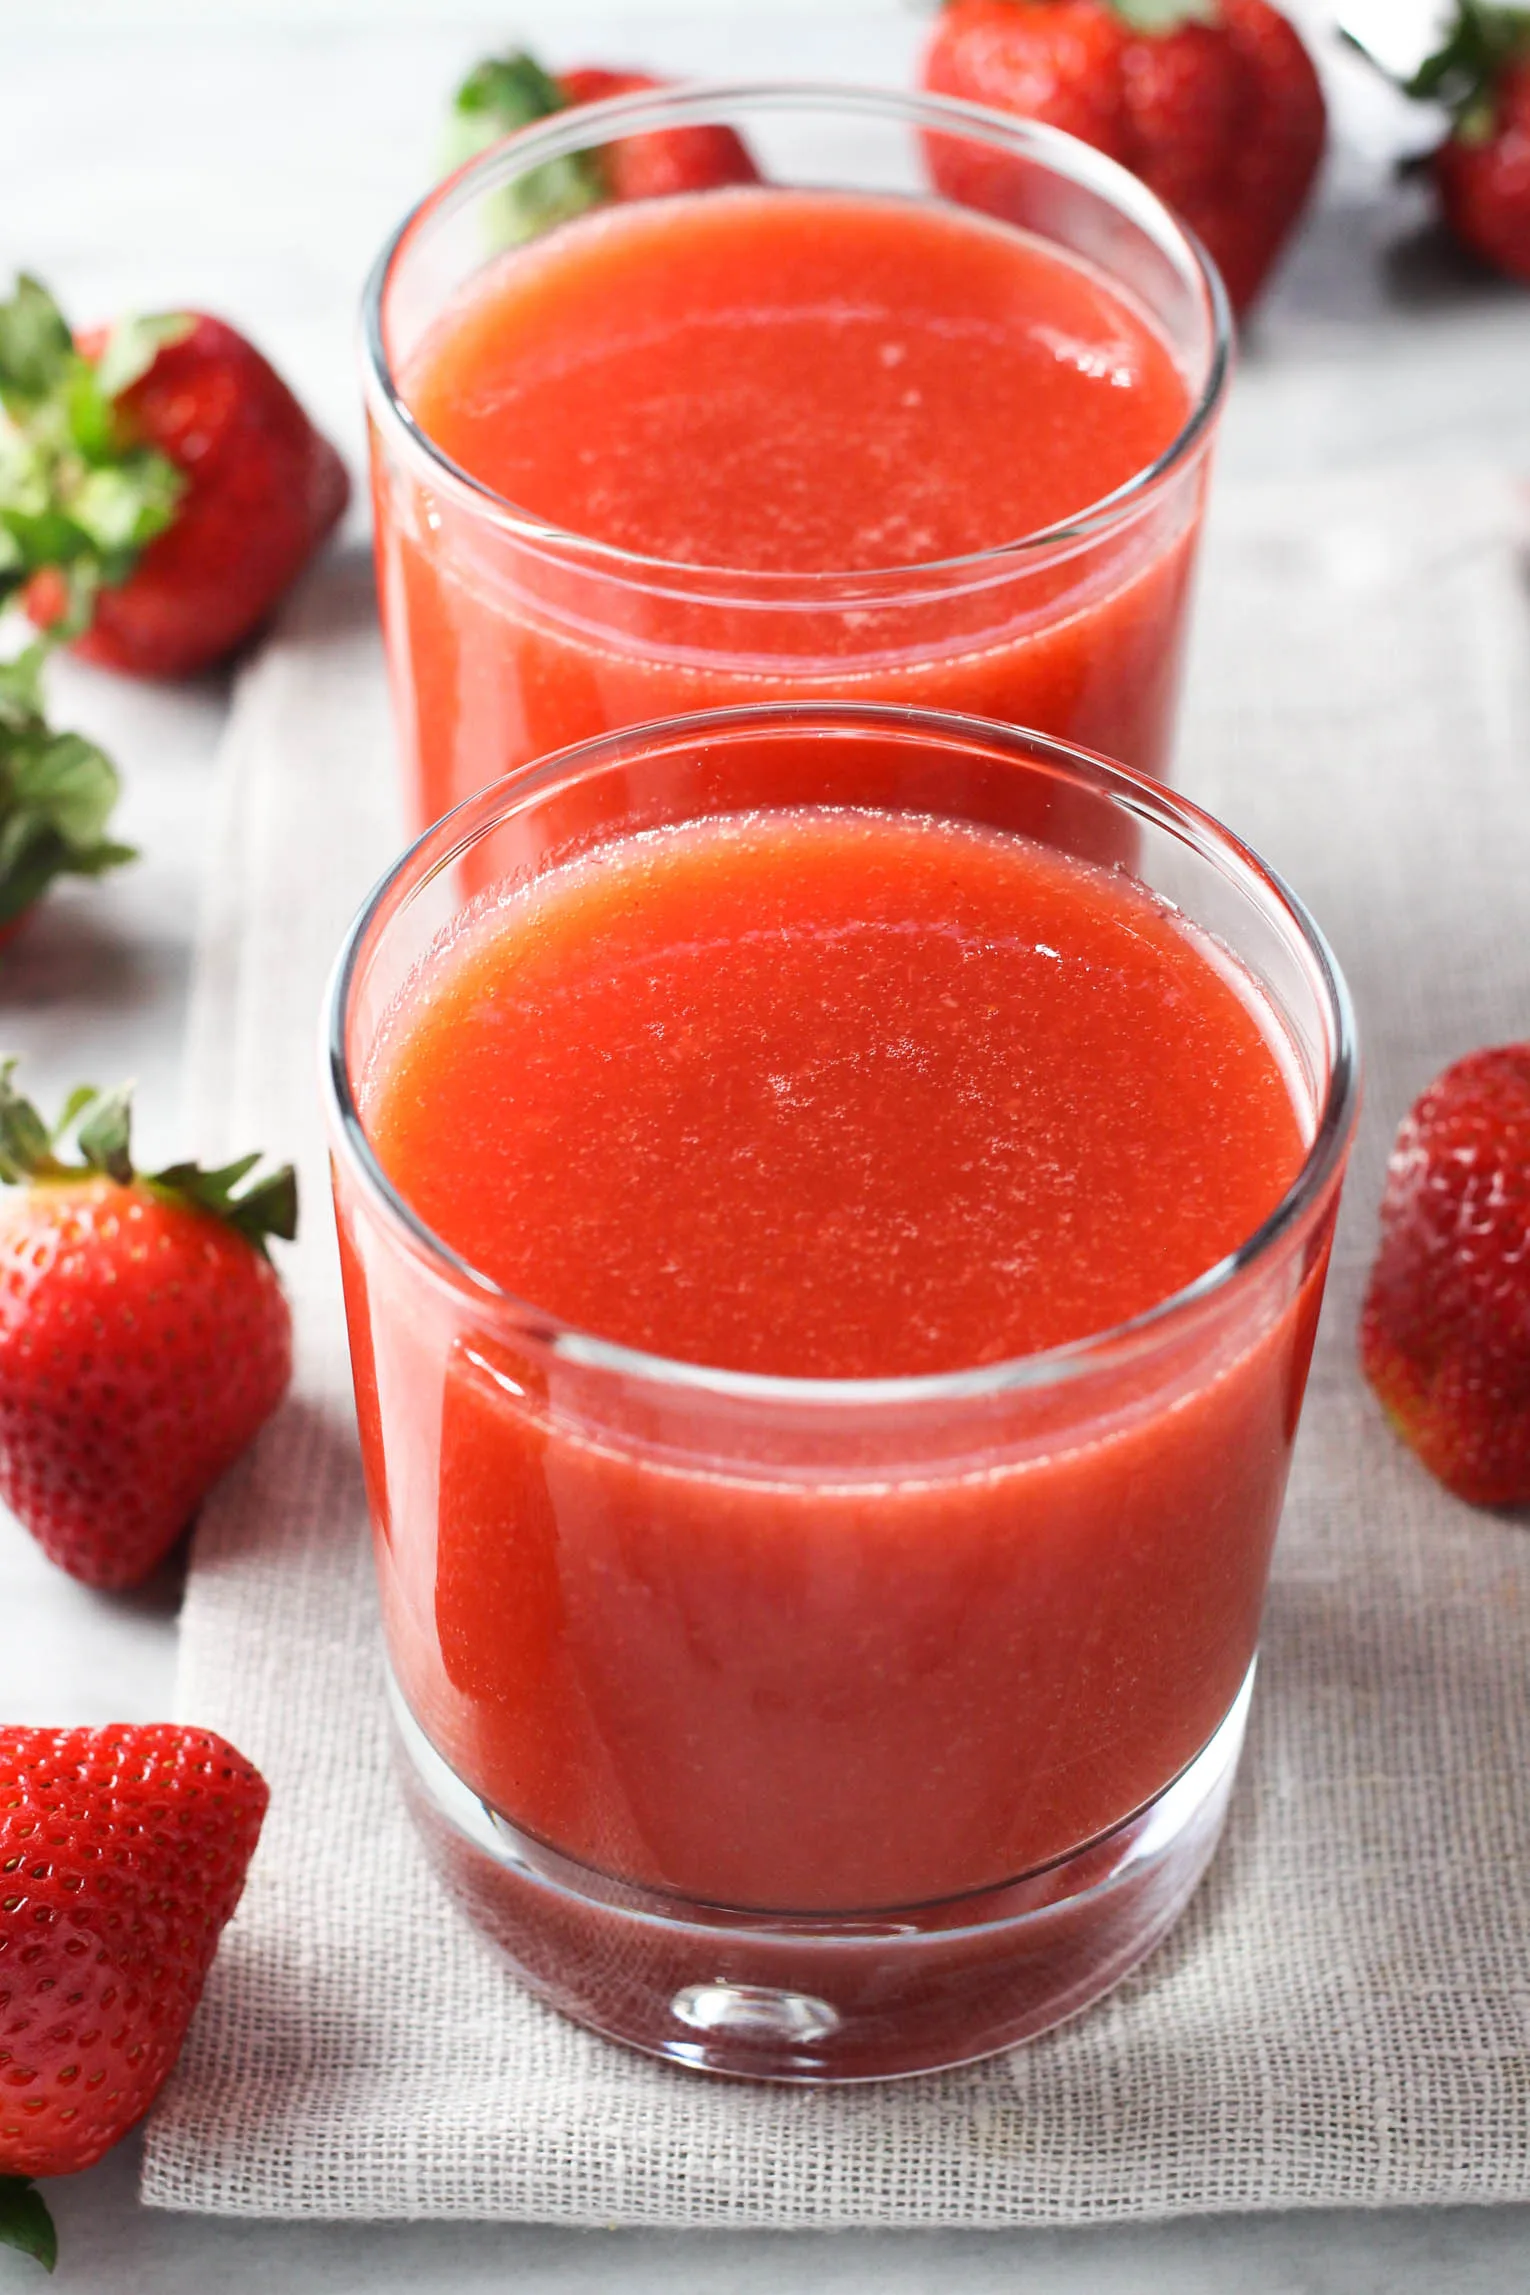 Two glasses of strawberry juice. A few fresh strawberries around them.